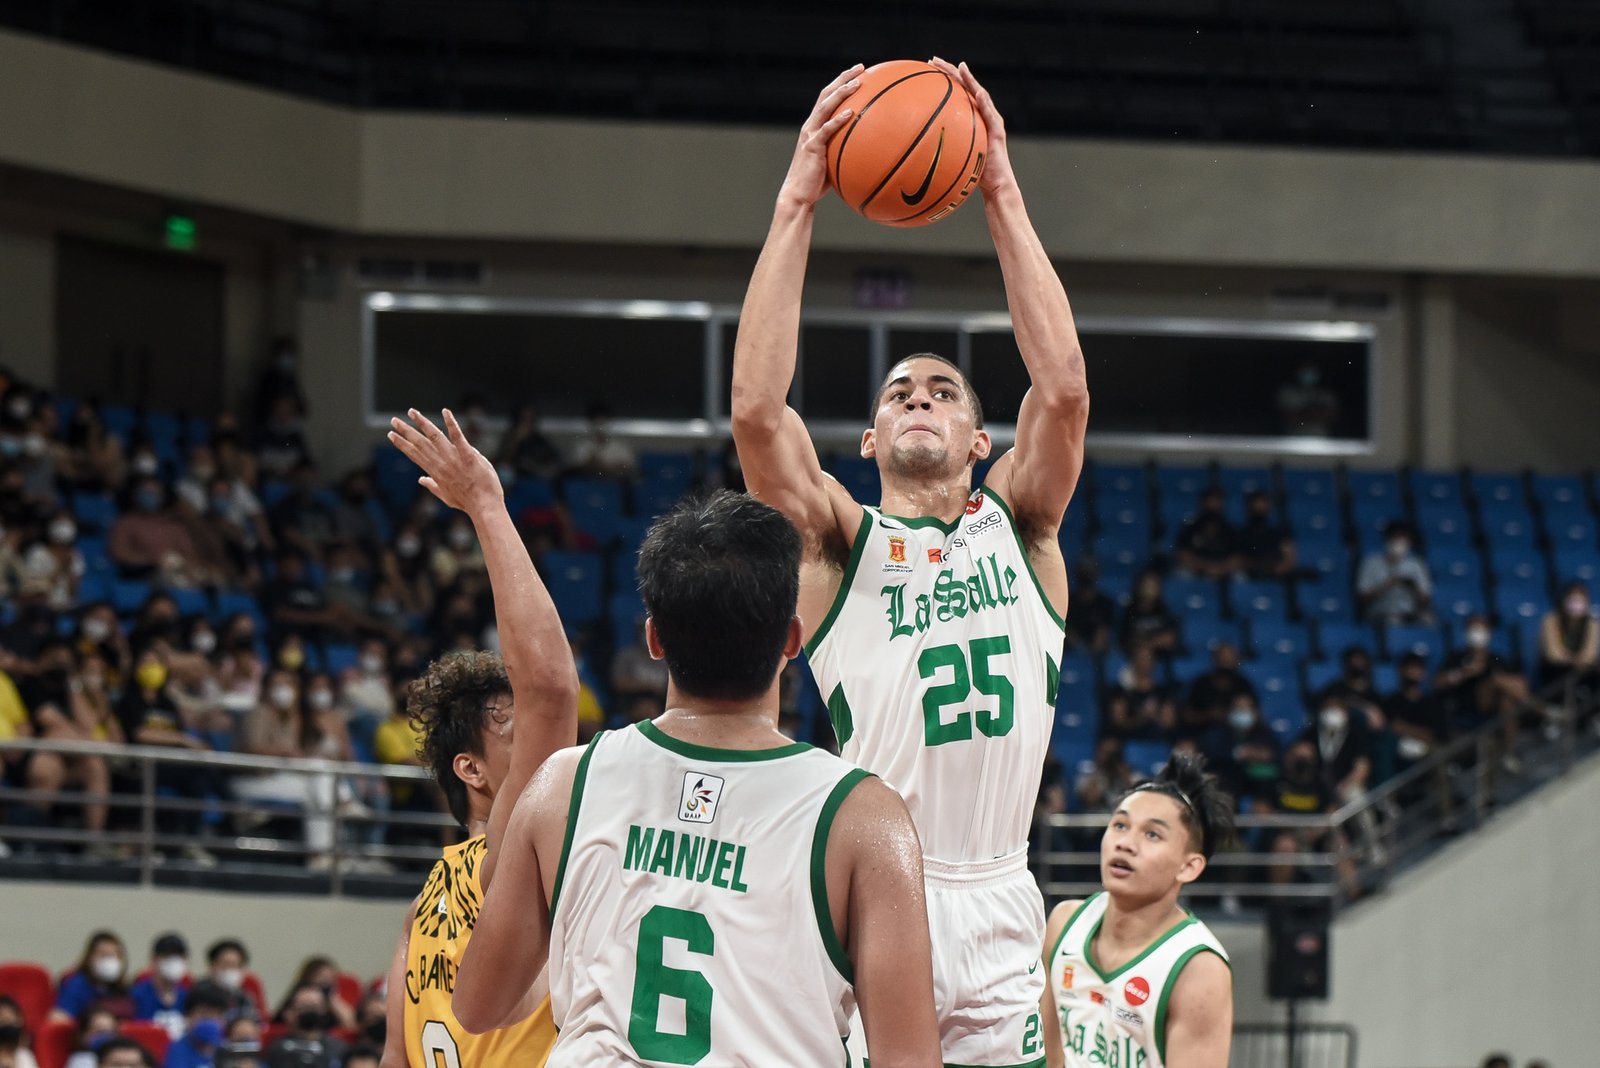 Mike Phillips of the DLSU Green Archers [UAAP photo]